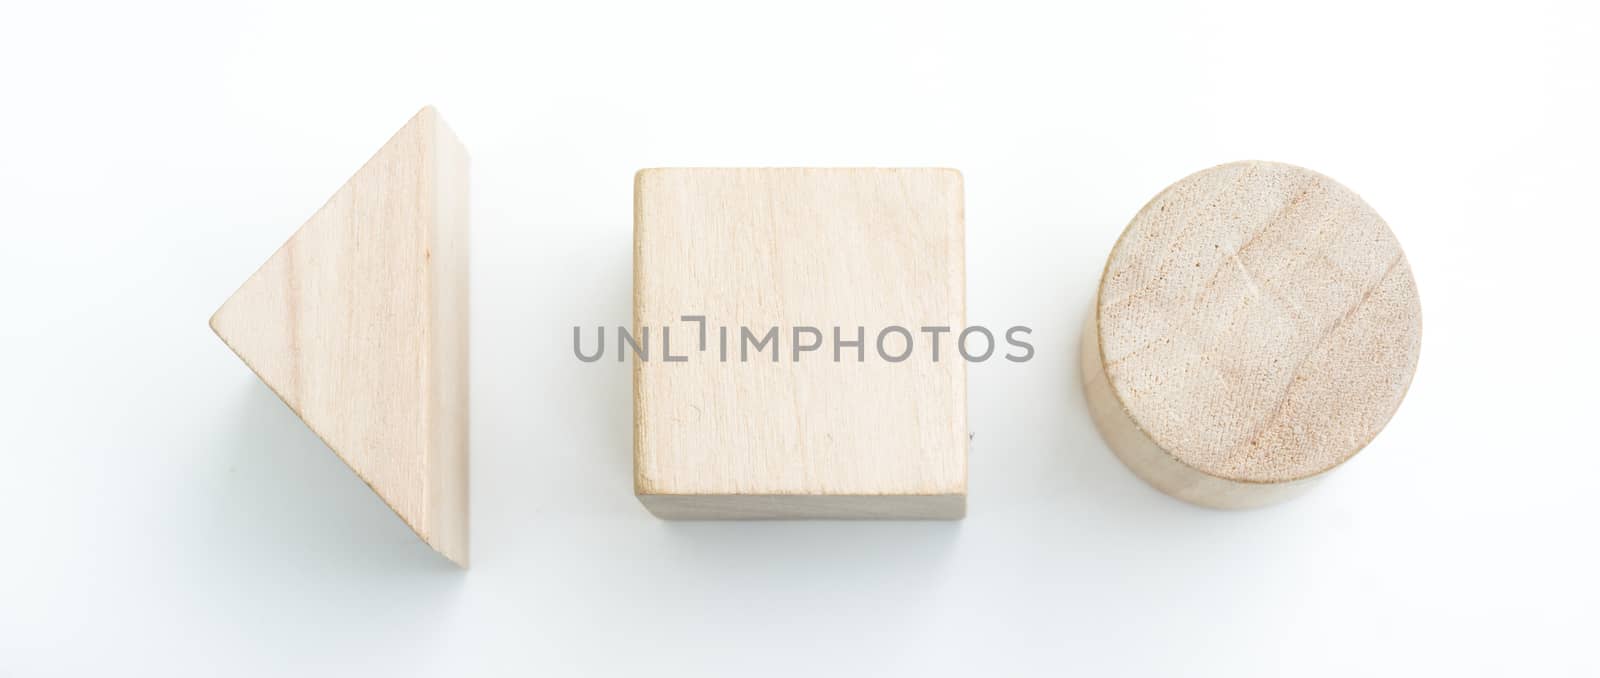 simple signs made from wood blocks isolated over white